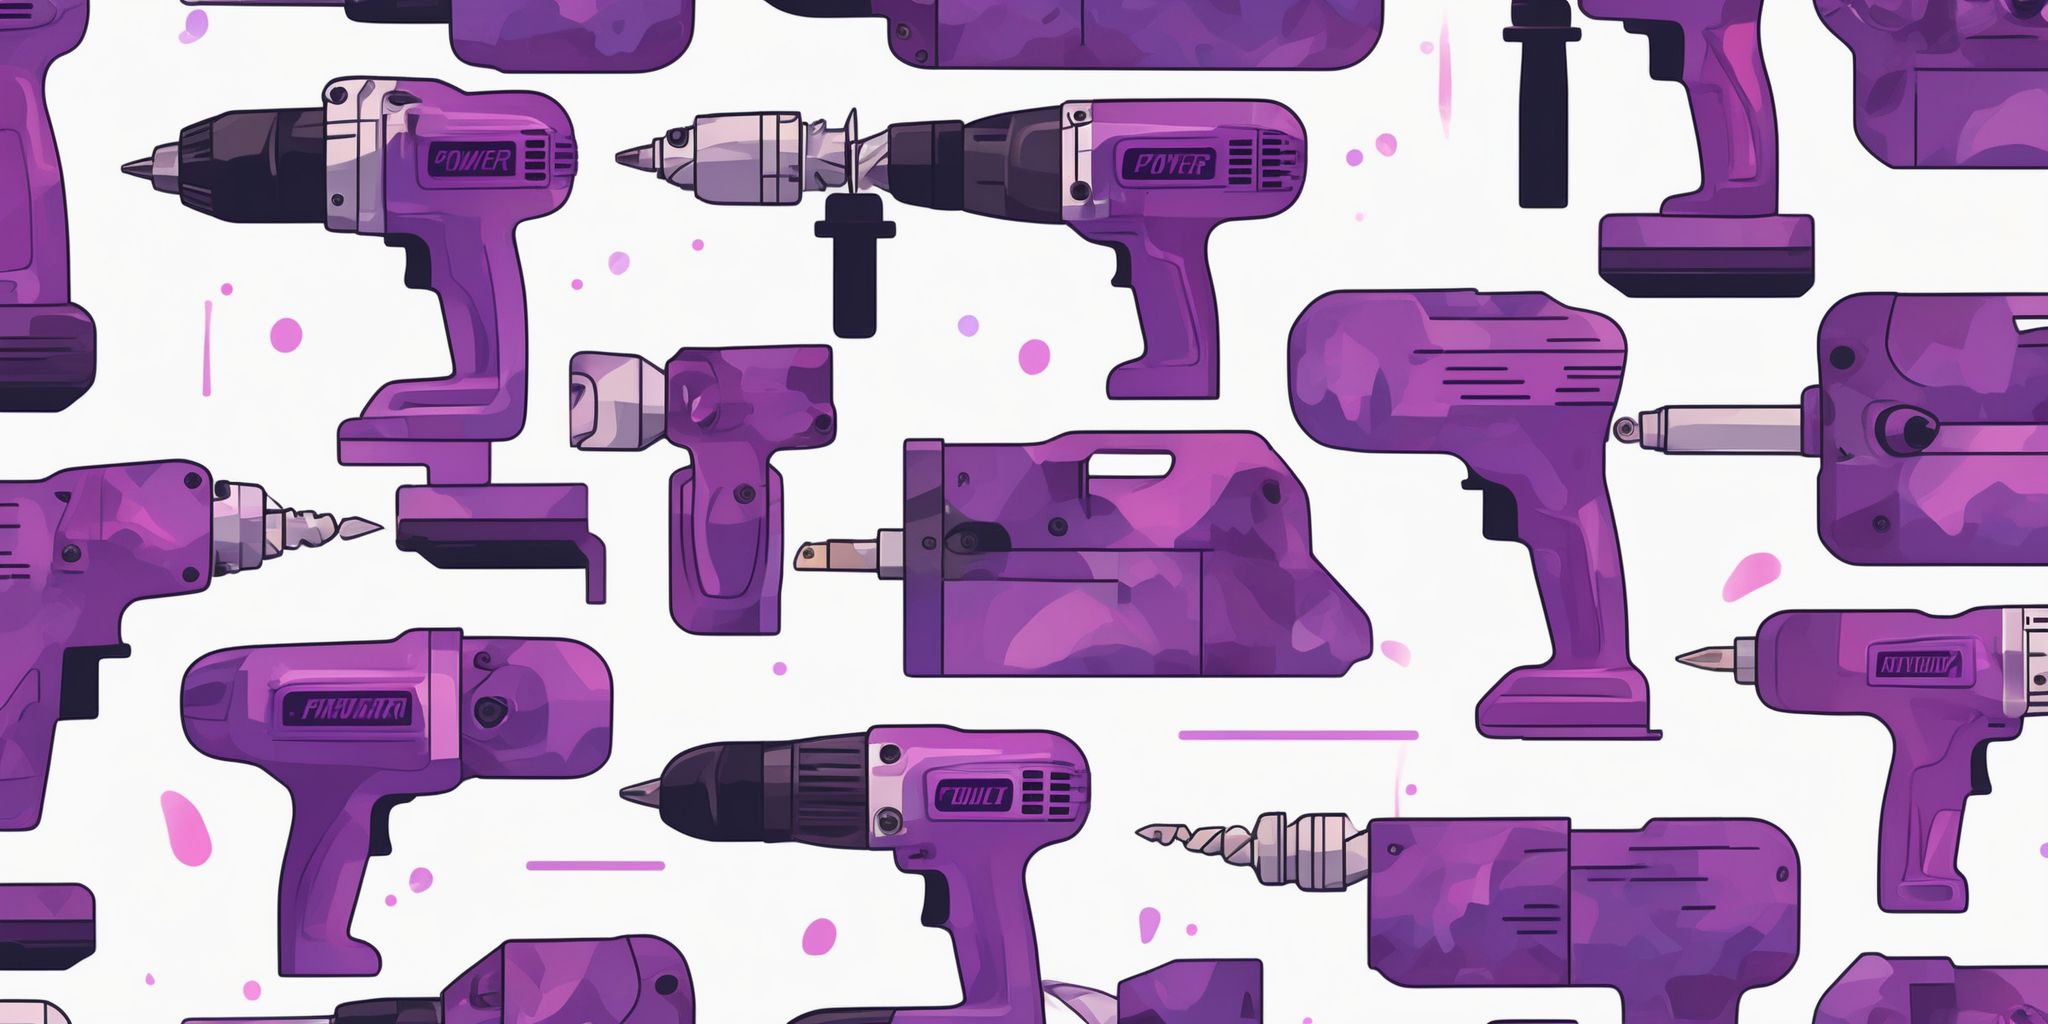 Power drill in flat illustration style, colorful purple gradient colors